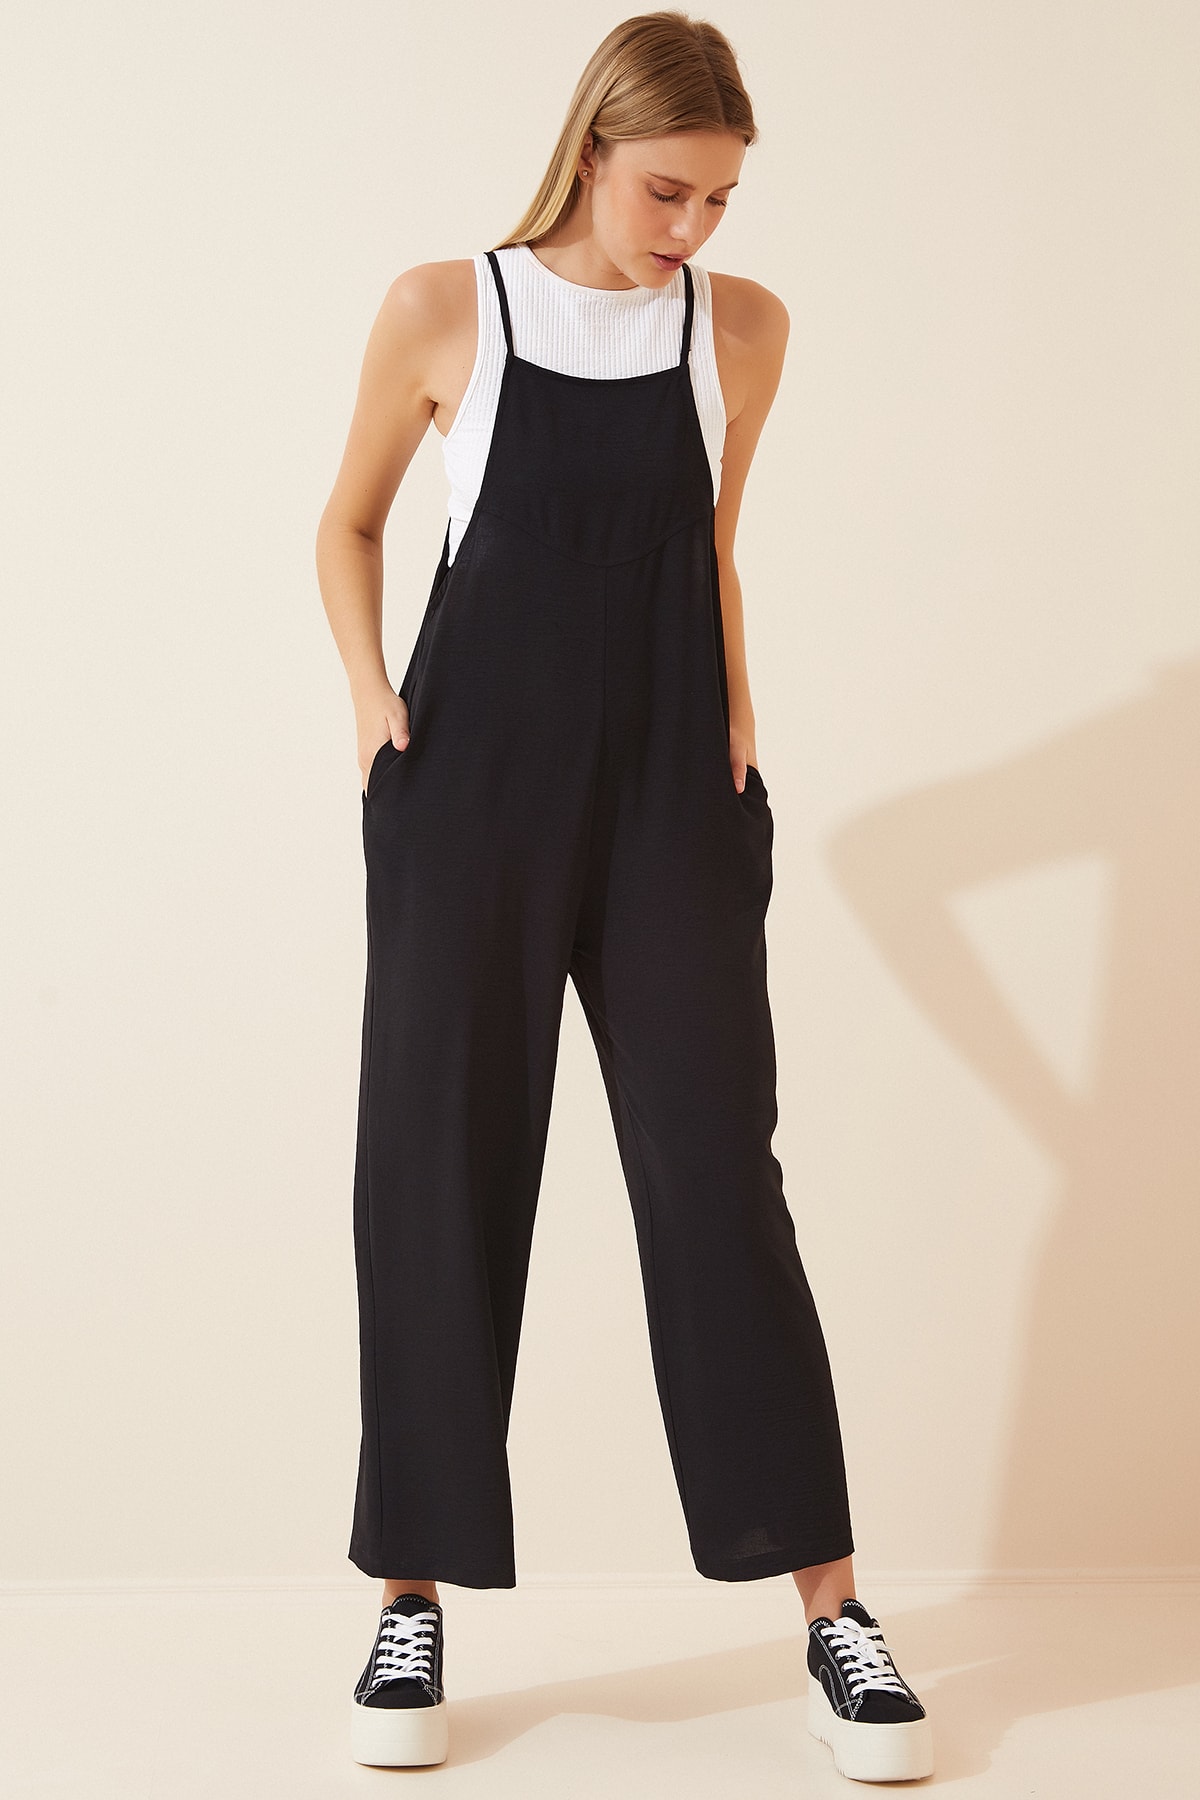 Happiness İstanbul Jumpsuit - Black - Relaxed fit